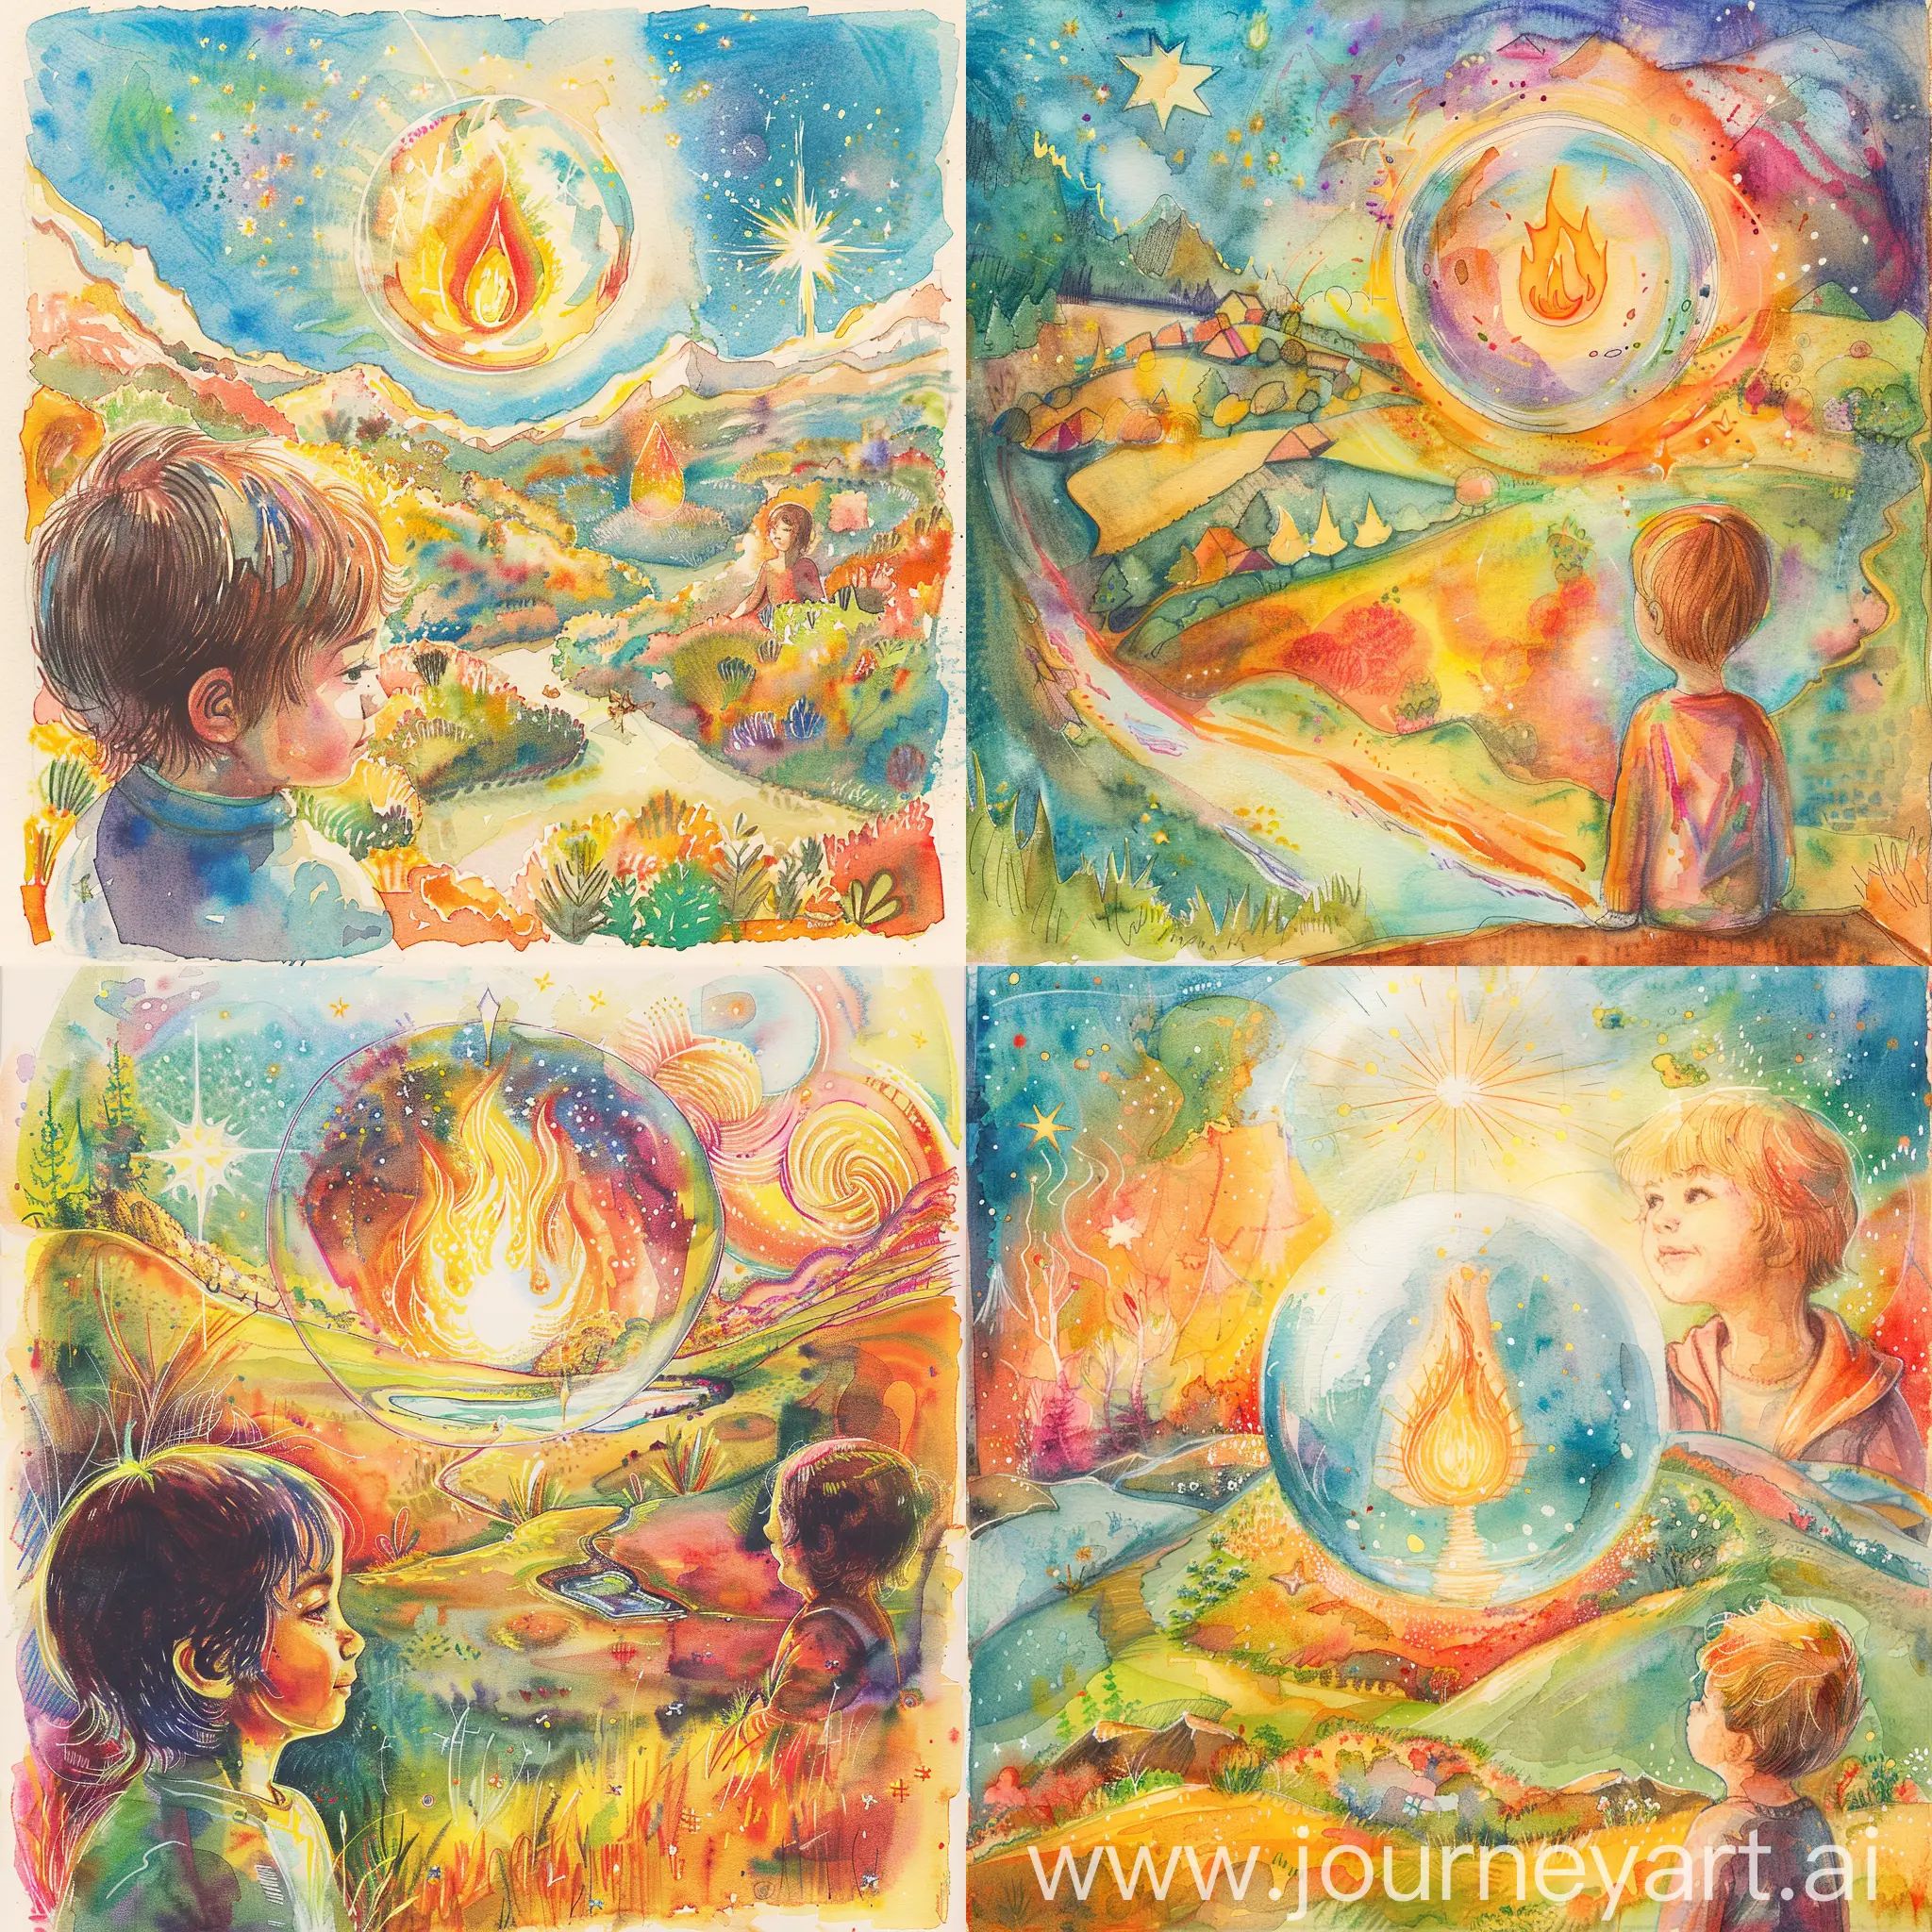 Watercolor illustration of a young child, a flame (focus) inside a glass ball, and a bright star surrounded by a colorful landscape and a child looking at the glass ball on the back.